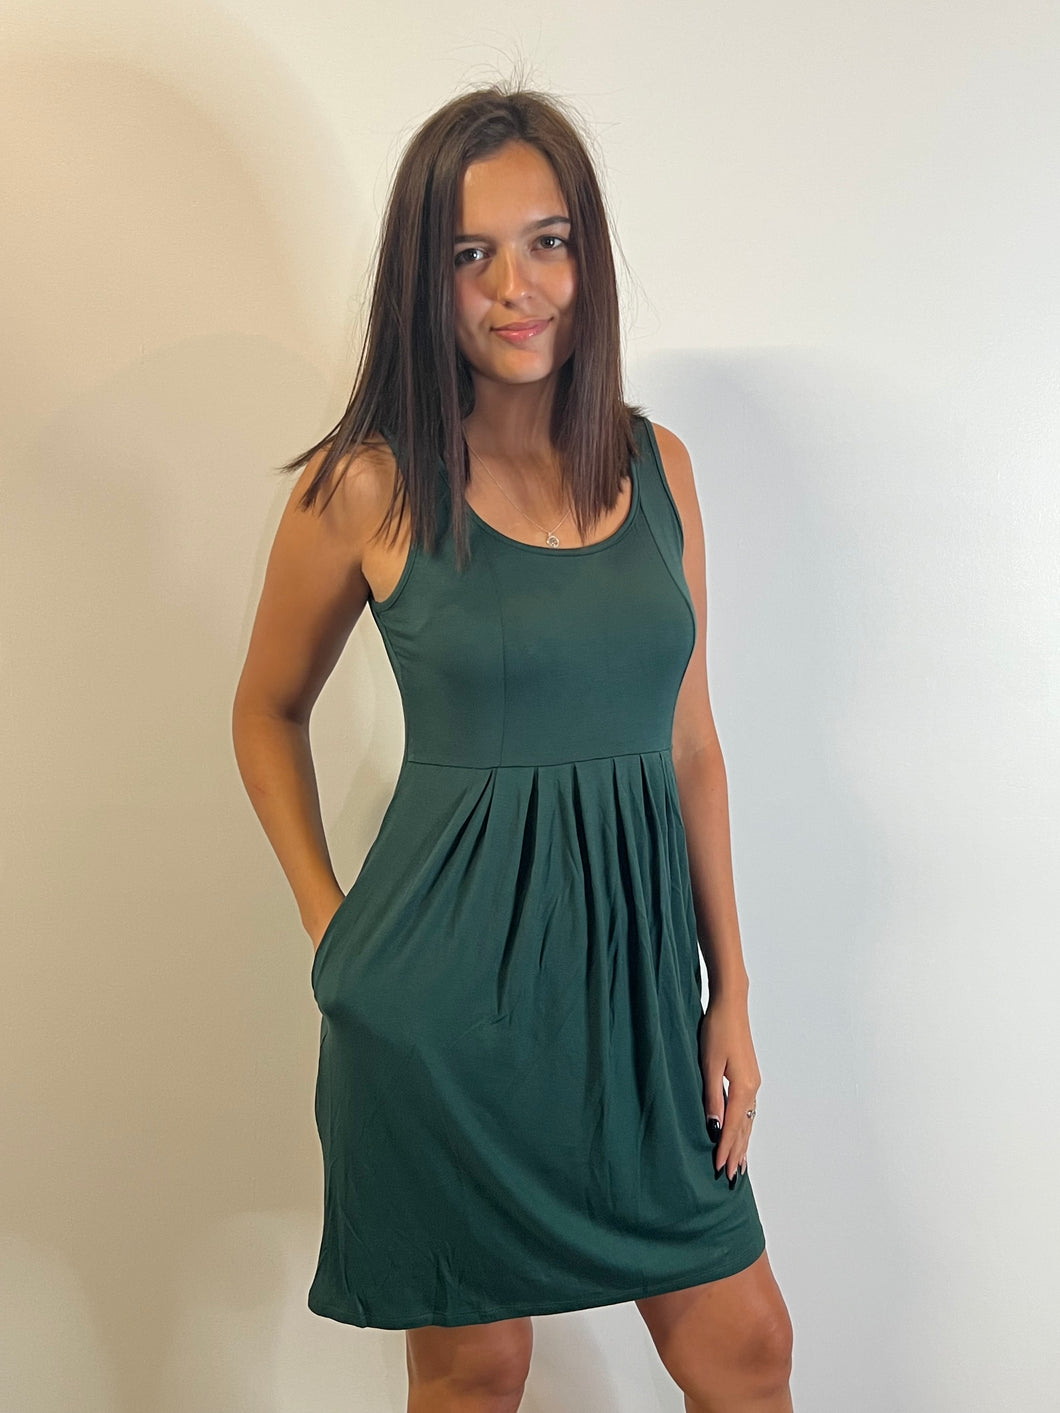 Green sleeveless dress with front pleats and pockets